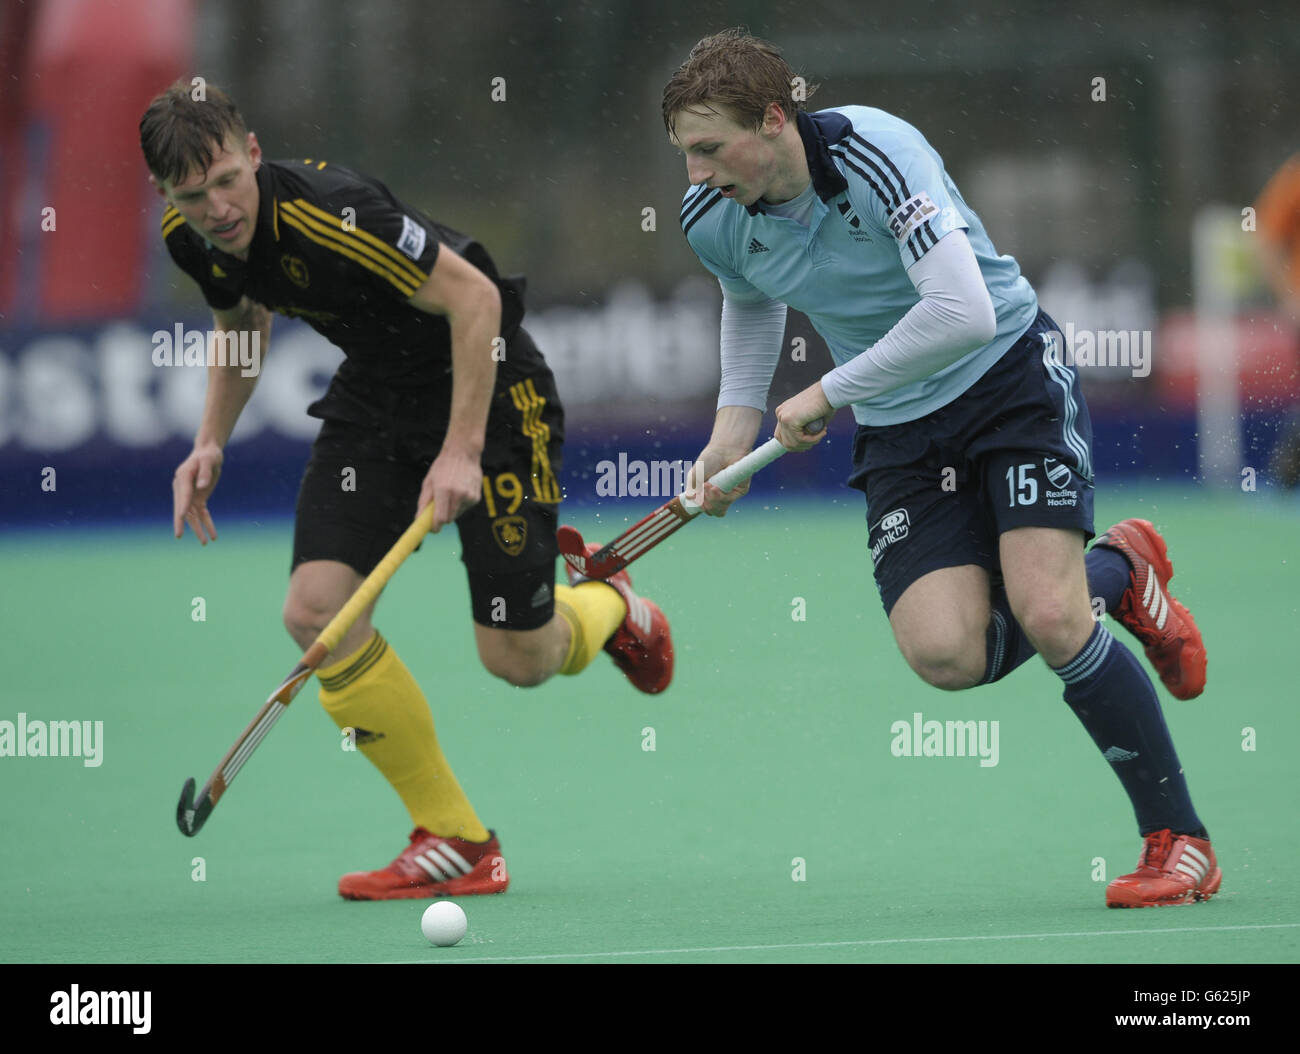 Hockey - NOW: Pensions Men's Hockey League Finals and Play-Offs - Sonning Lane Stock Photo